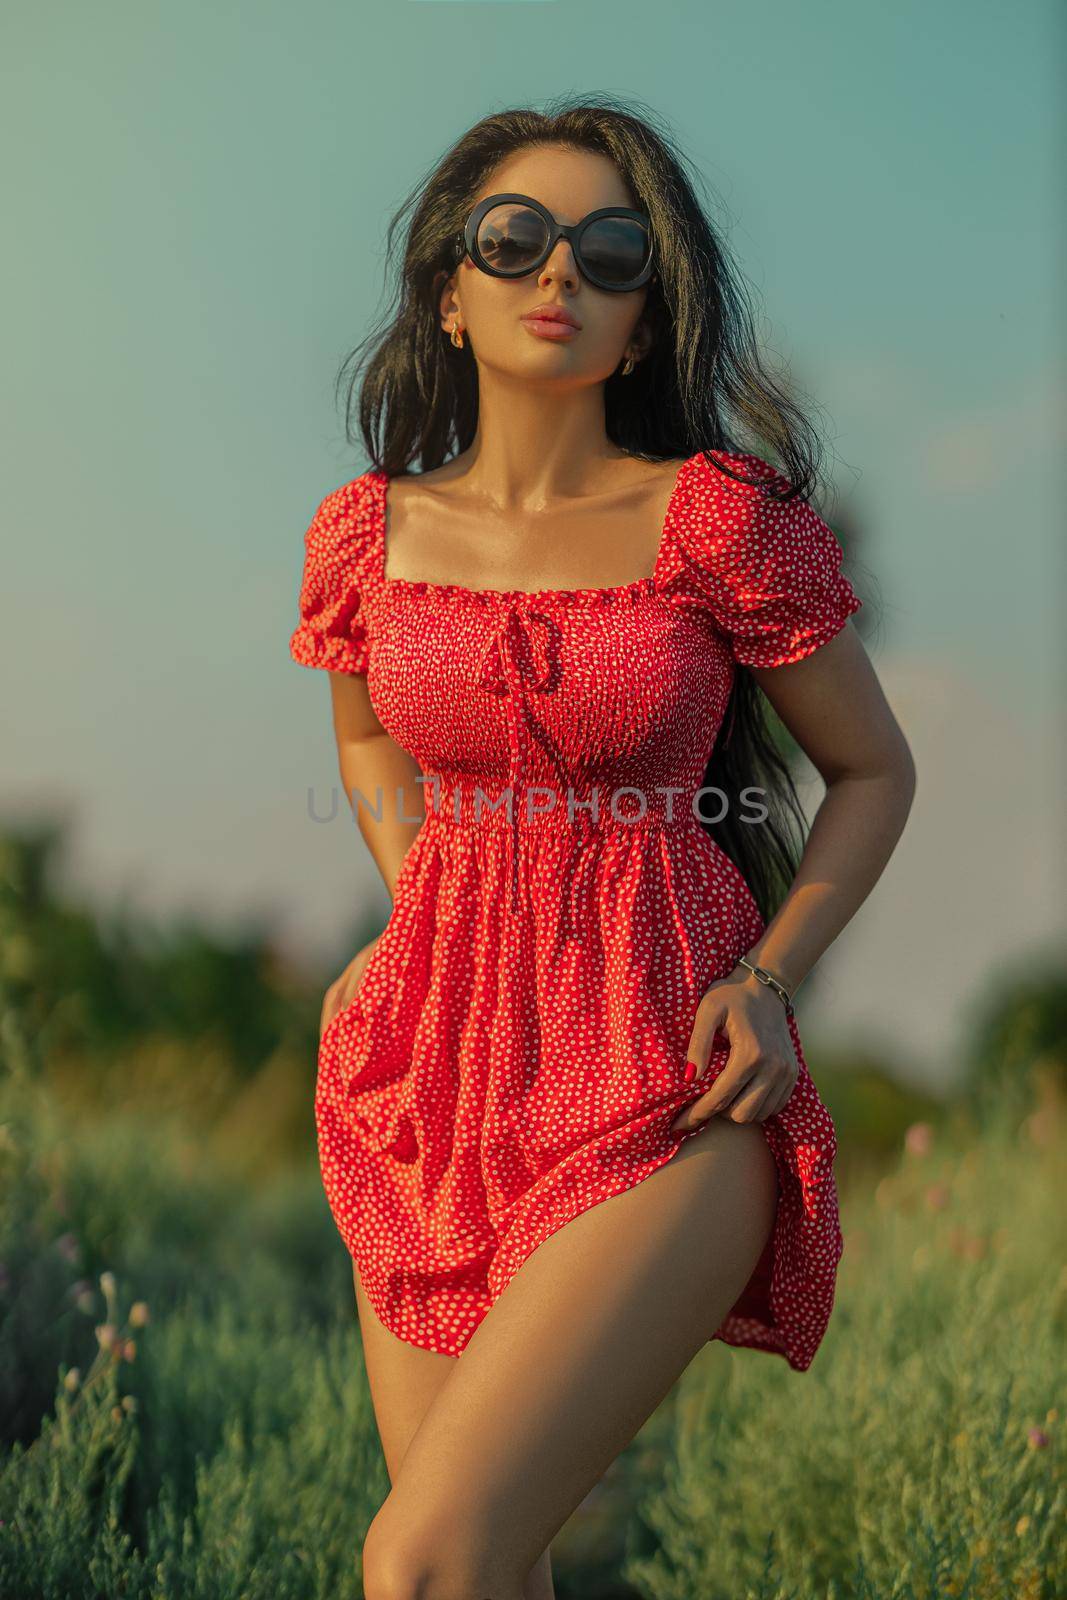 Sexy brunette girl in a red dress with polka dots posing in a meadow among wild herbs, flowers and trees on a summer sunny day